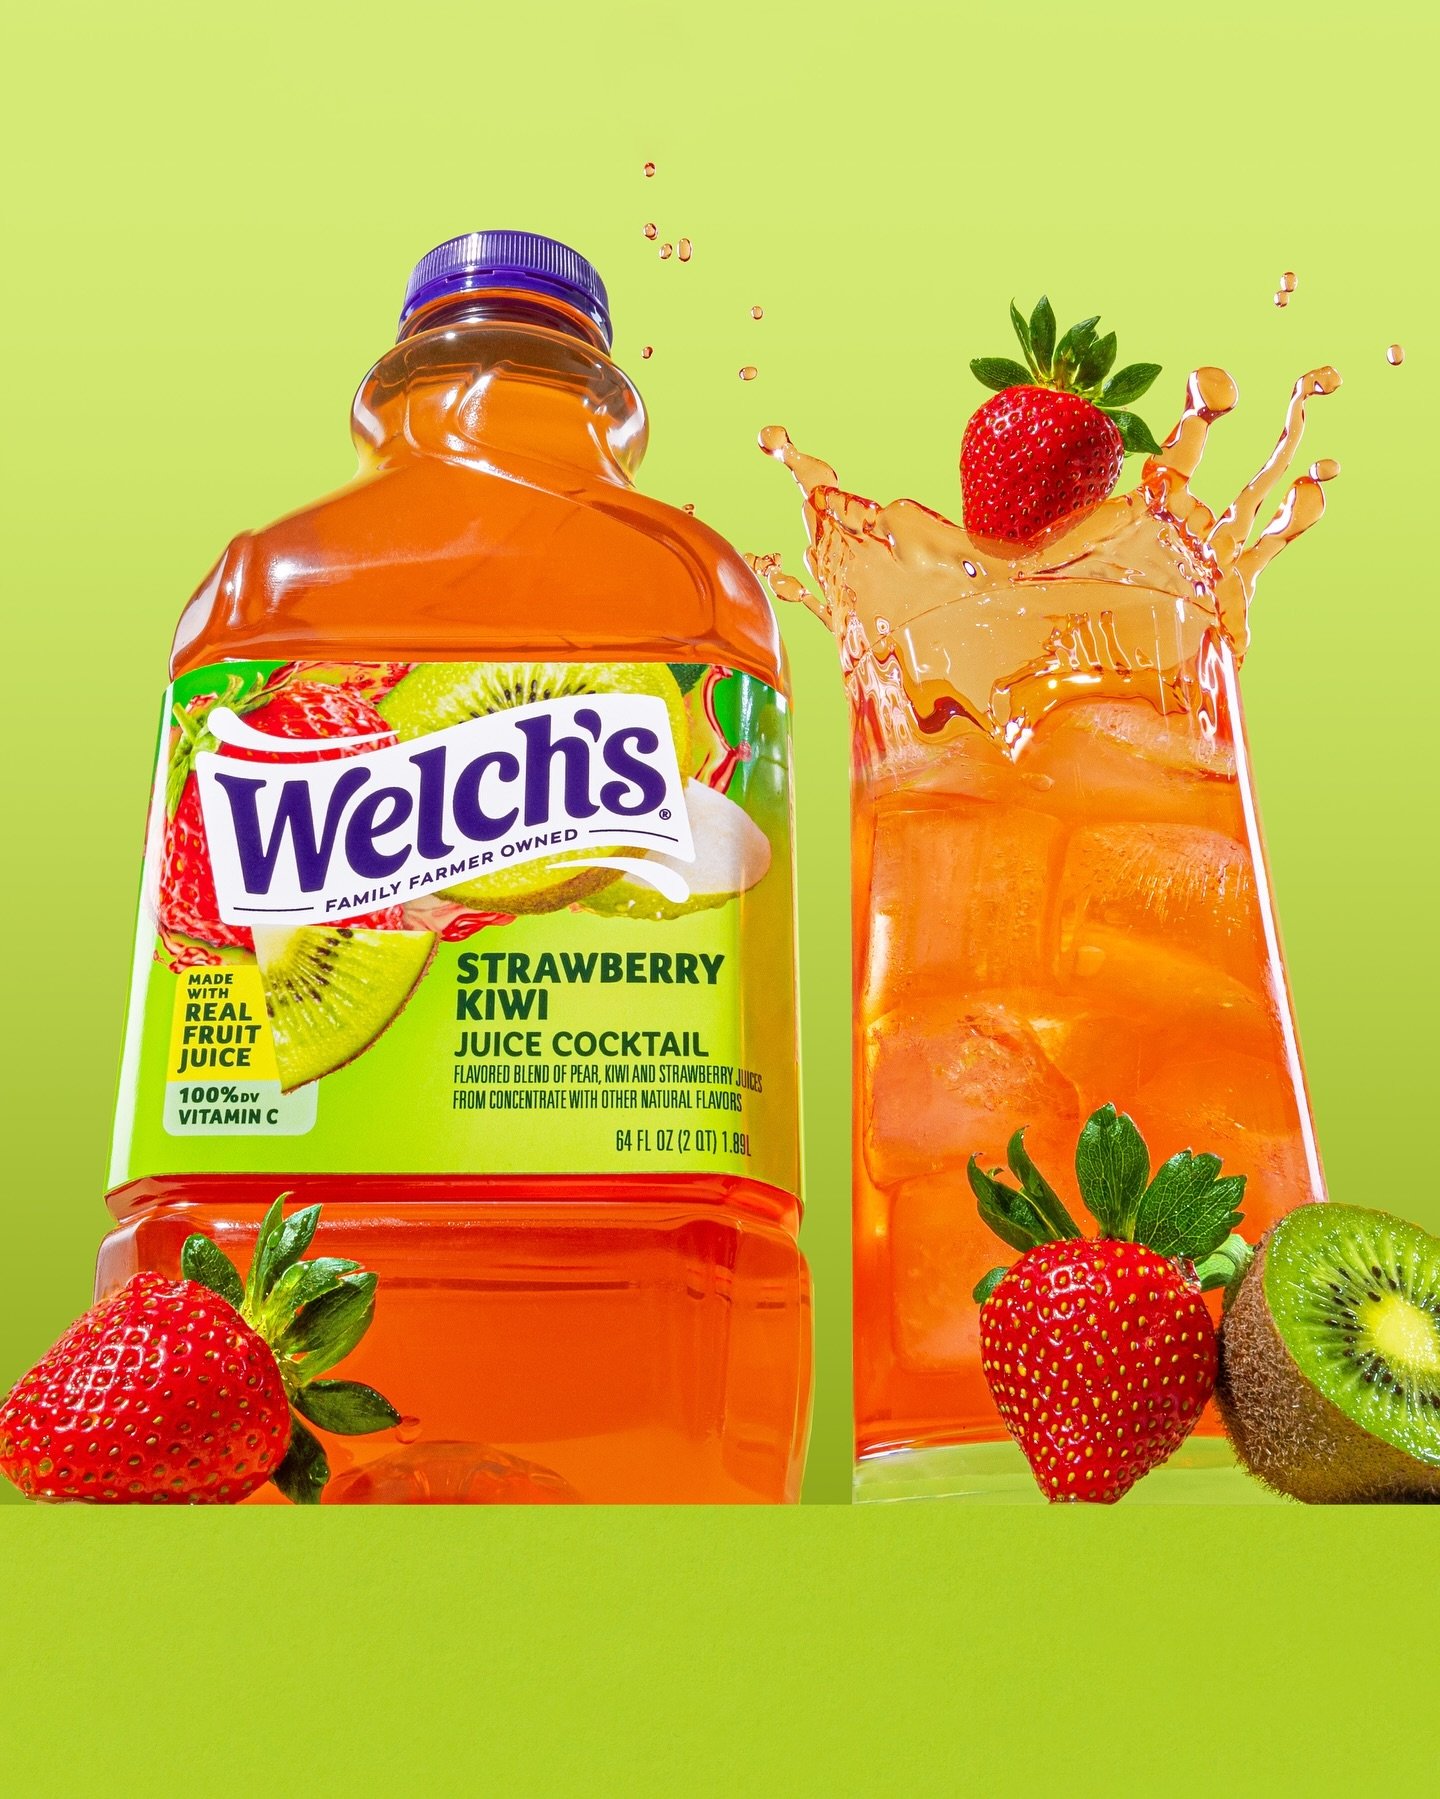 🍓 🥝 💦 shot for @welchs 

.
.
.
.
.
#productphotography #foodphotography #foodstyling #creativecontent #photostudio #advertisingcontent #commercialfoodphotography #commercialphotography #creativephotography